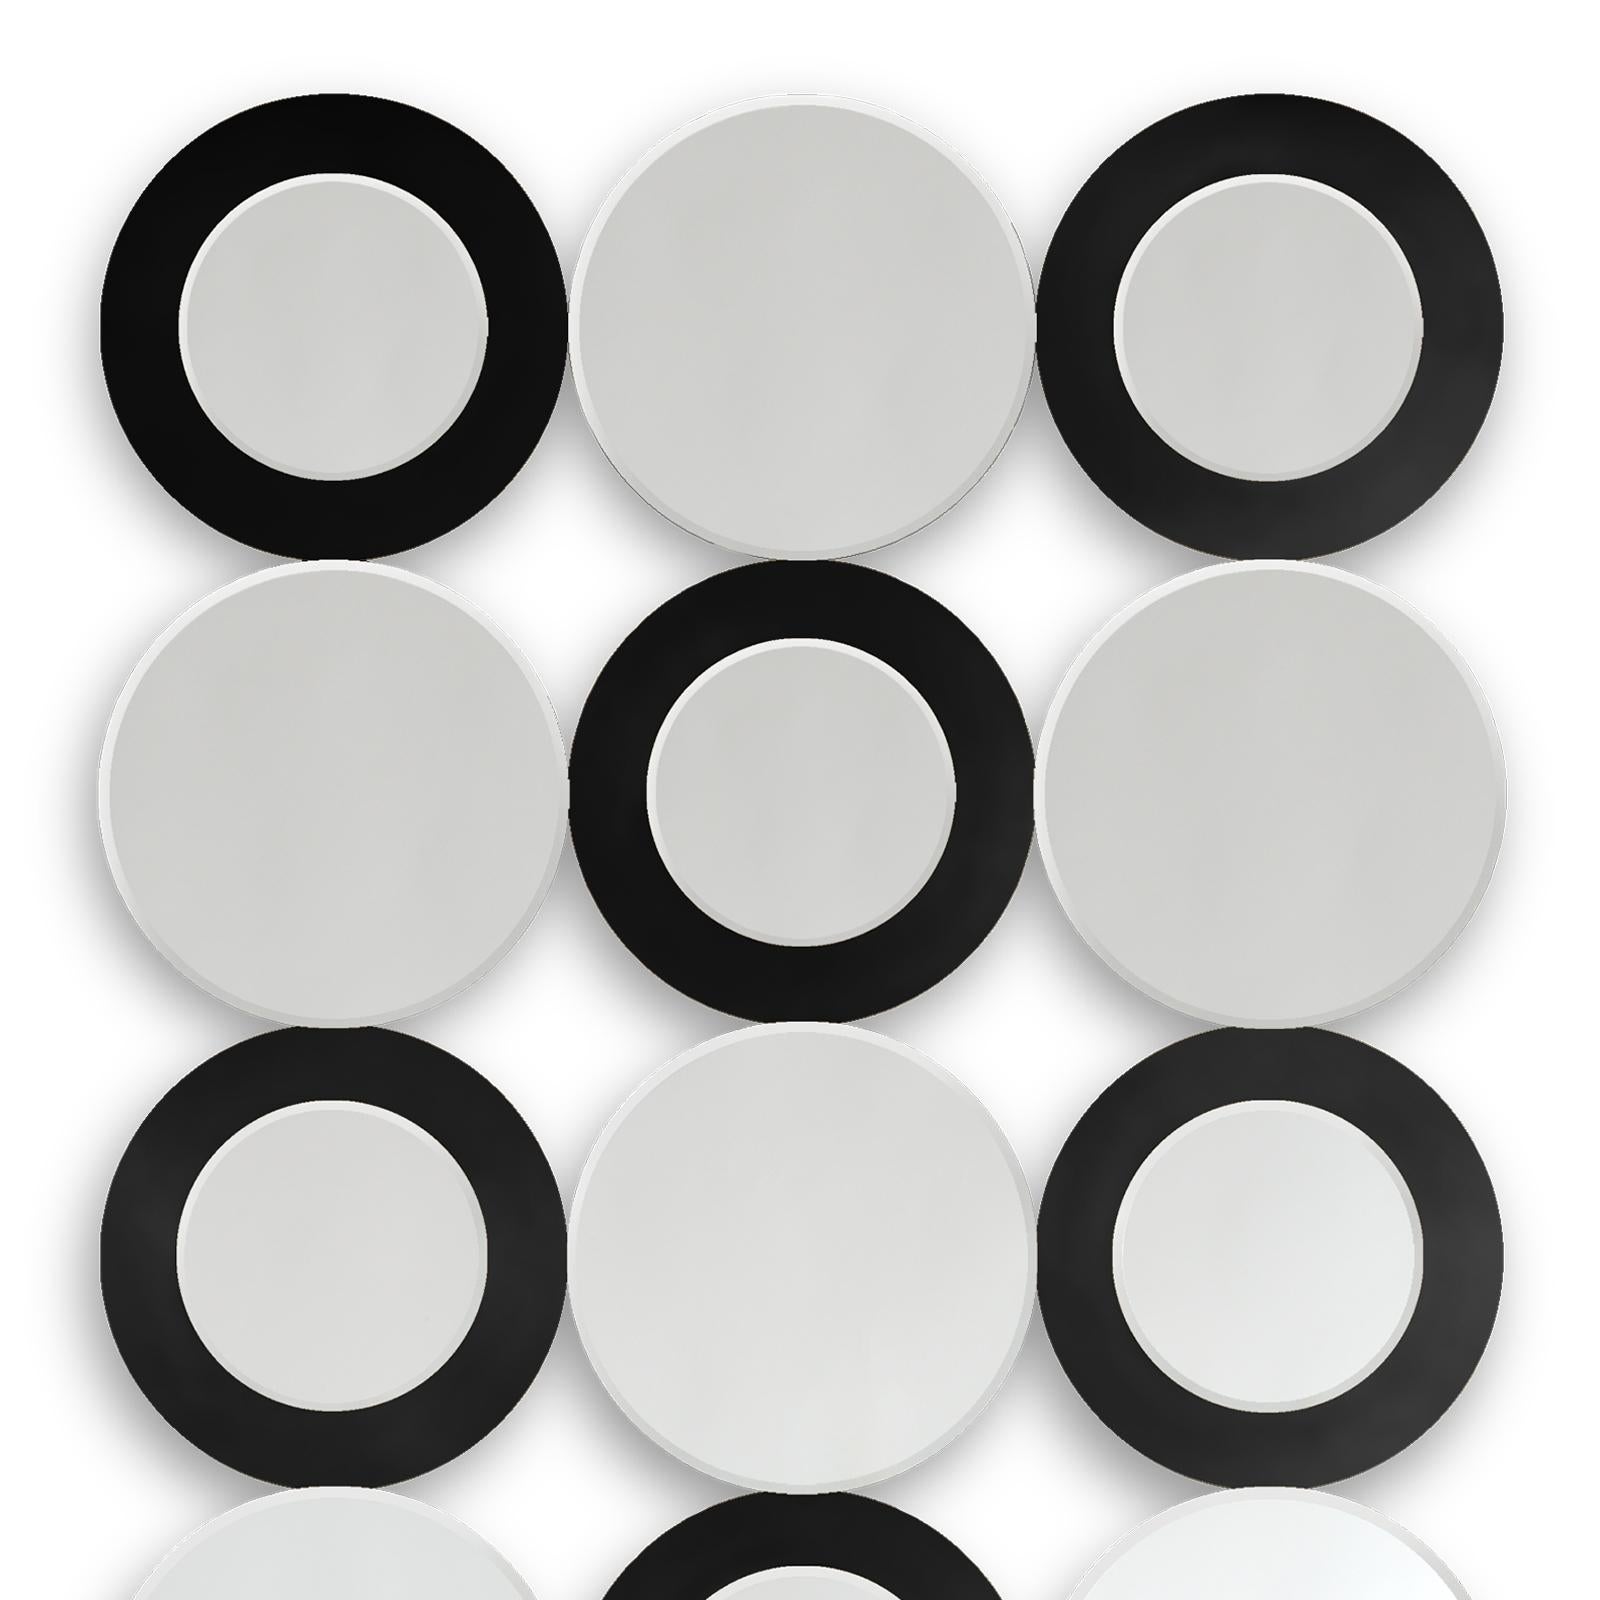 Mirror rings with 18 round clear mirror glass.
With black finish rings on 9 mirrors.
Also available with gold finish rings on 9 mirrors.